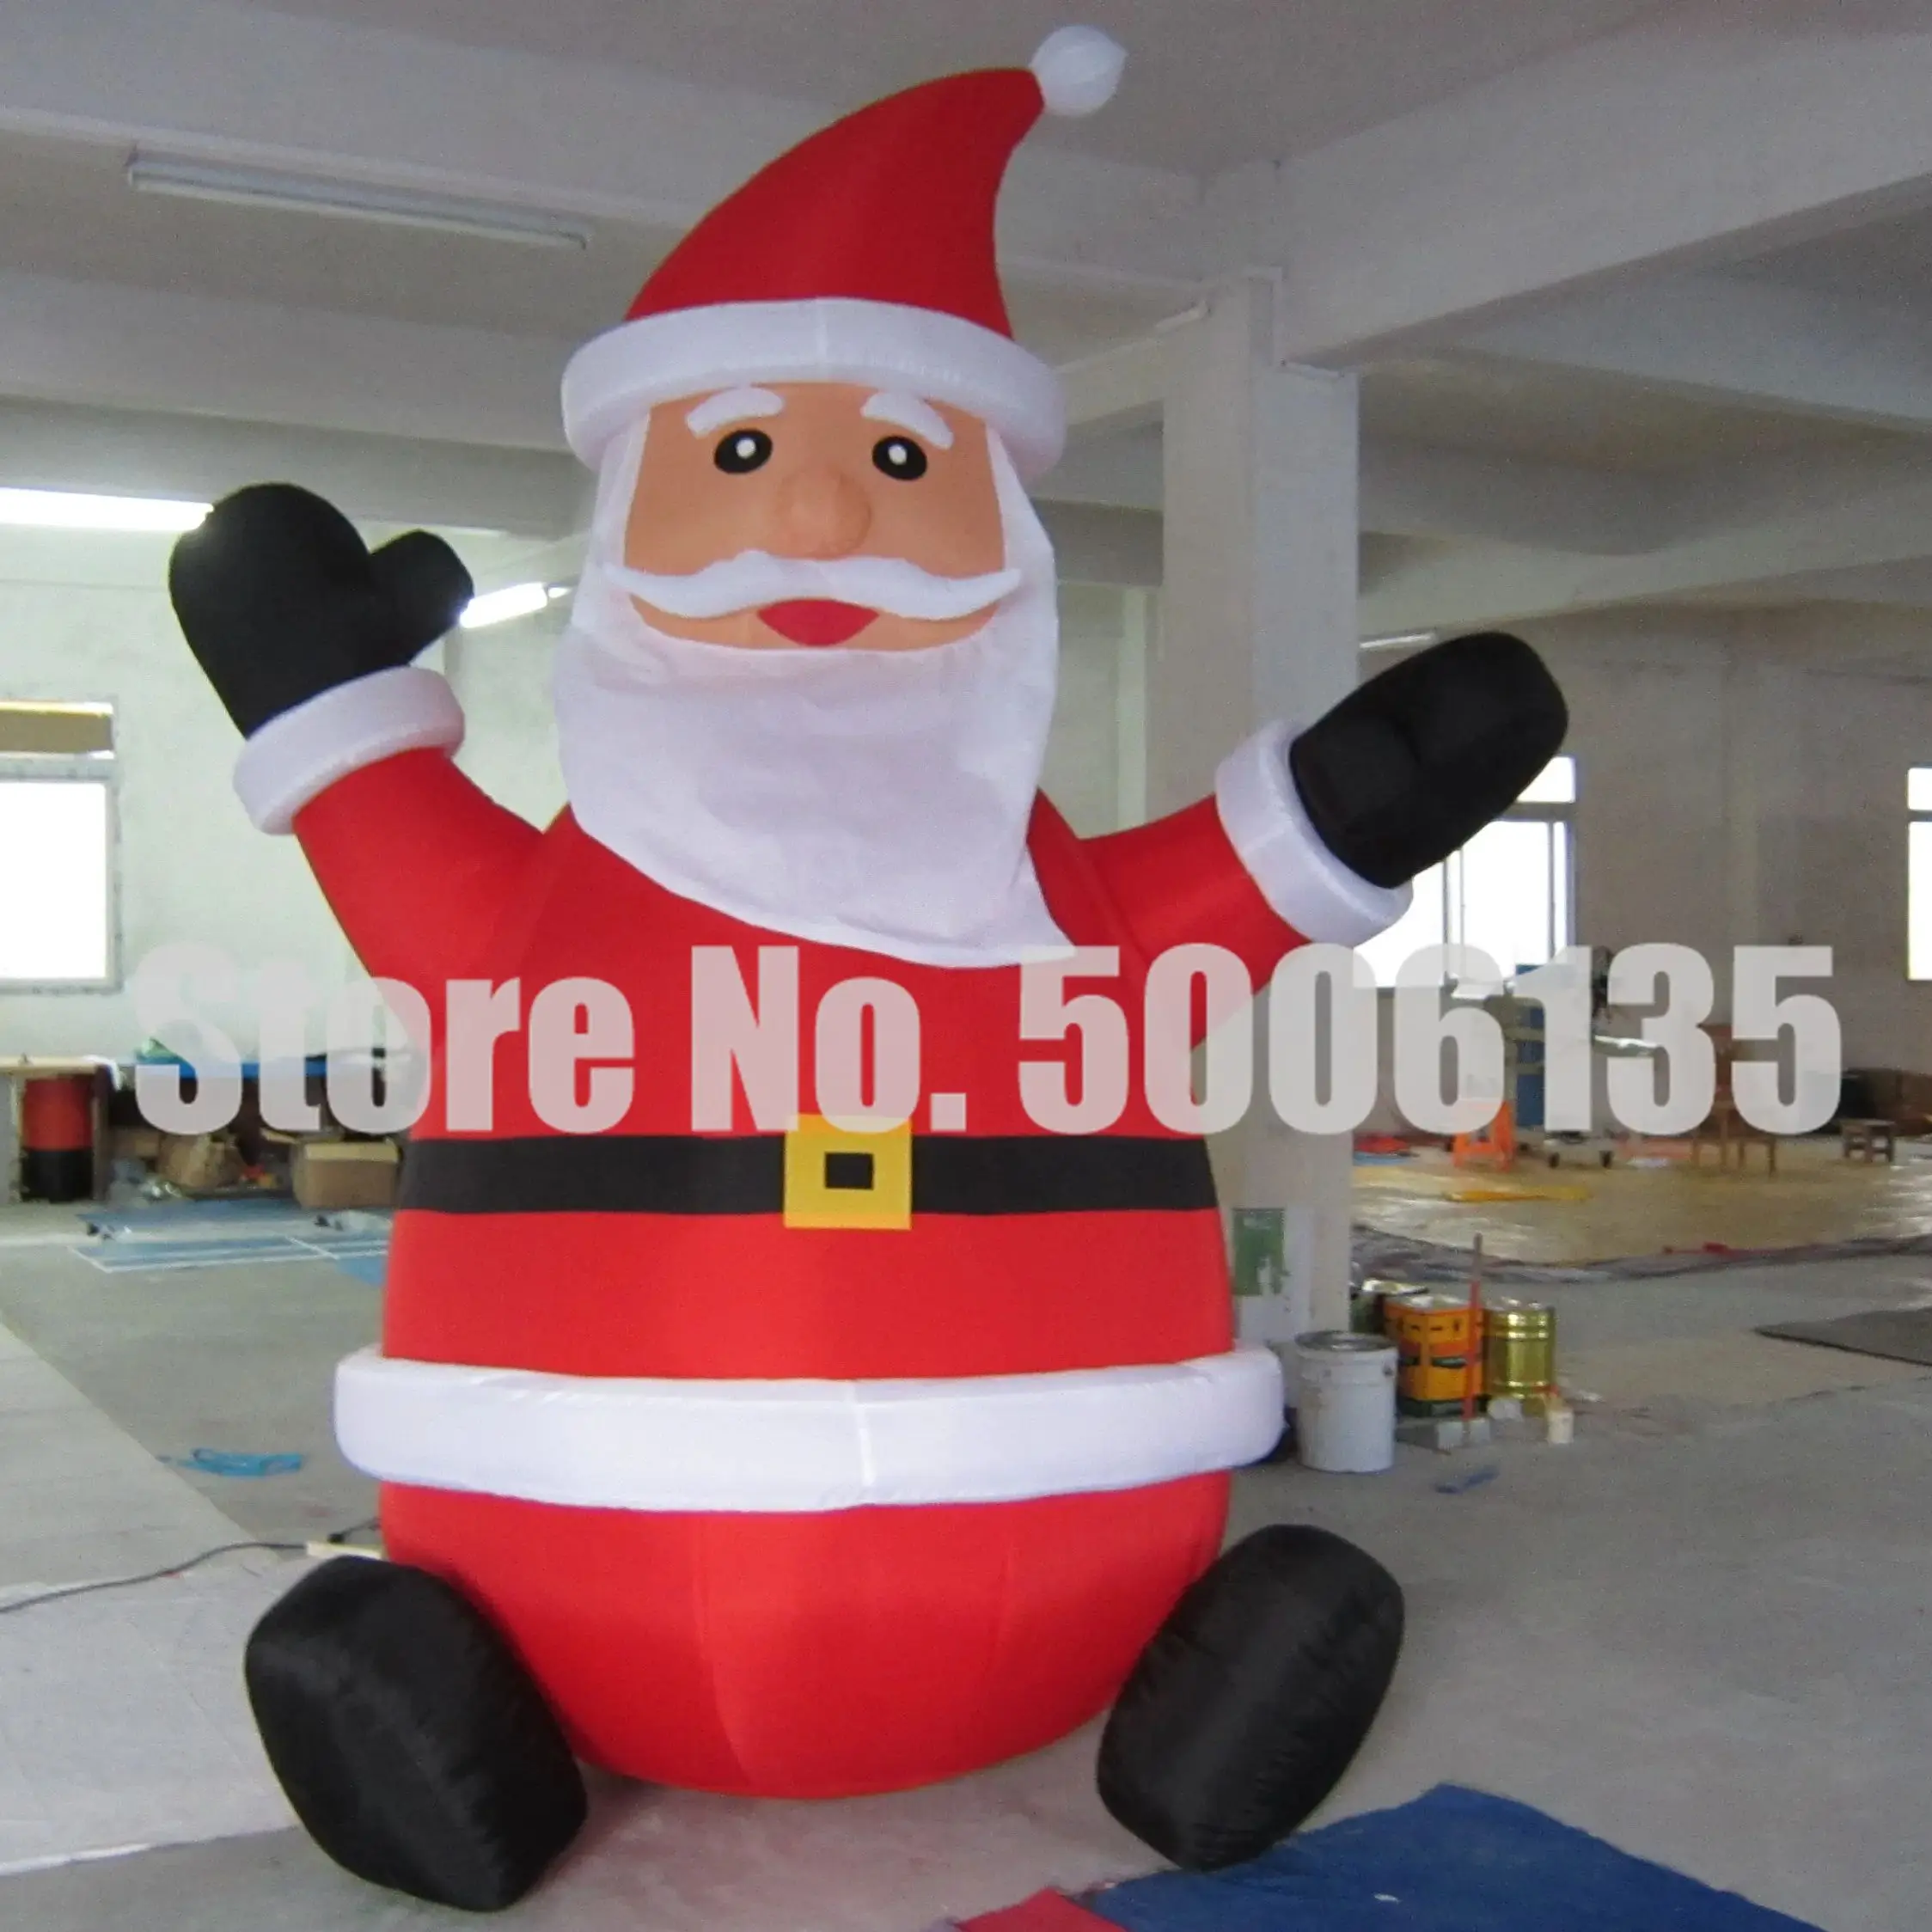 

Giant Christmas Advertising Decoration Inflatable Santa Claus Snowman Weather Proof Outdoor Party With Blower For Festival Event